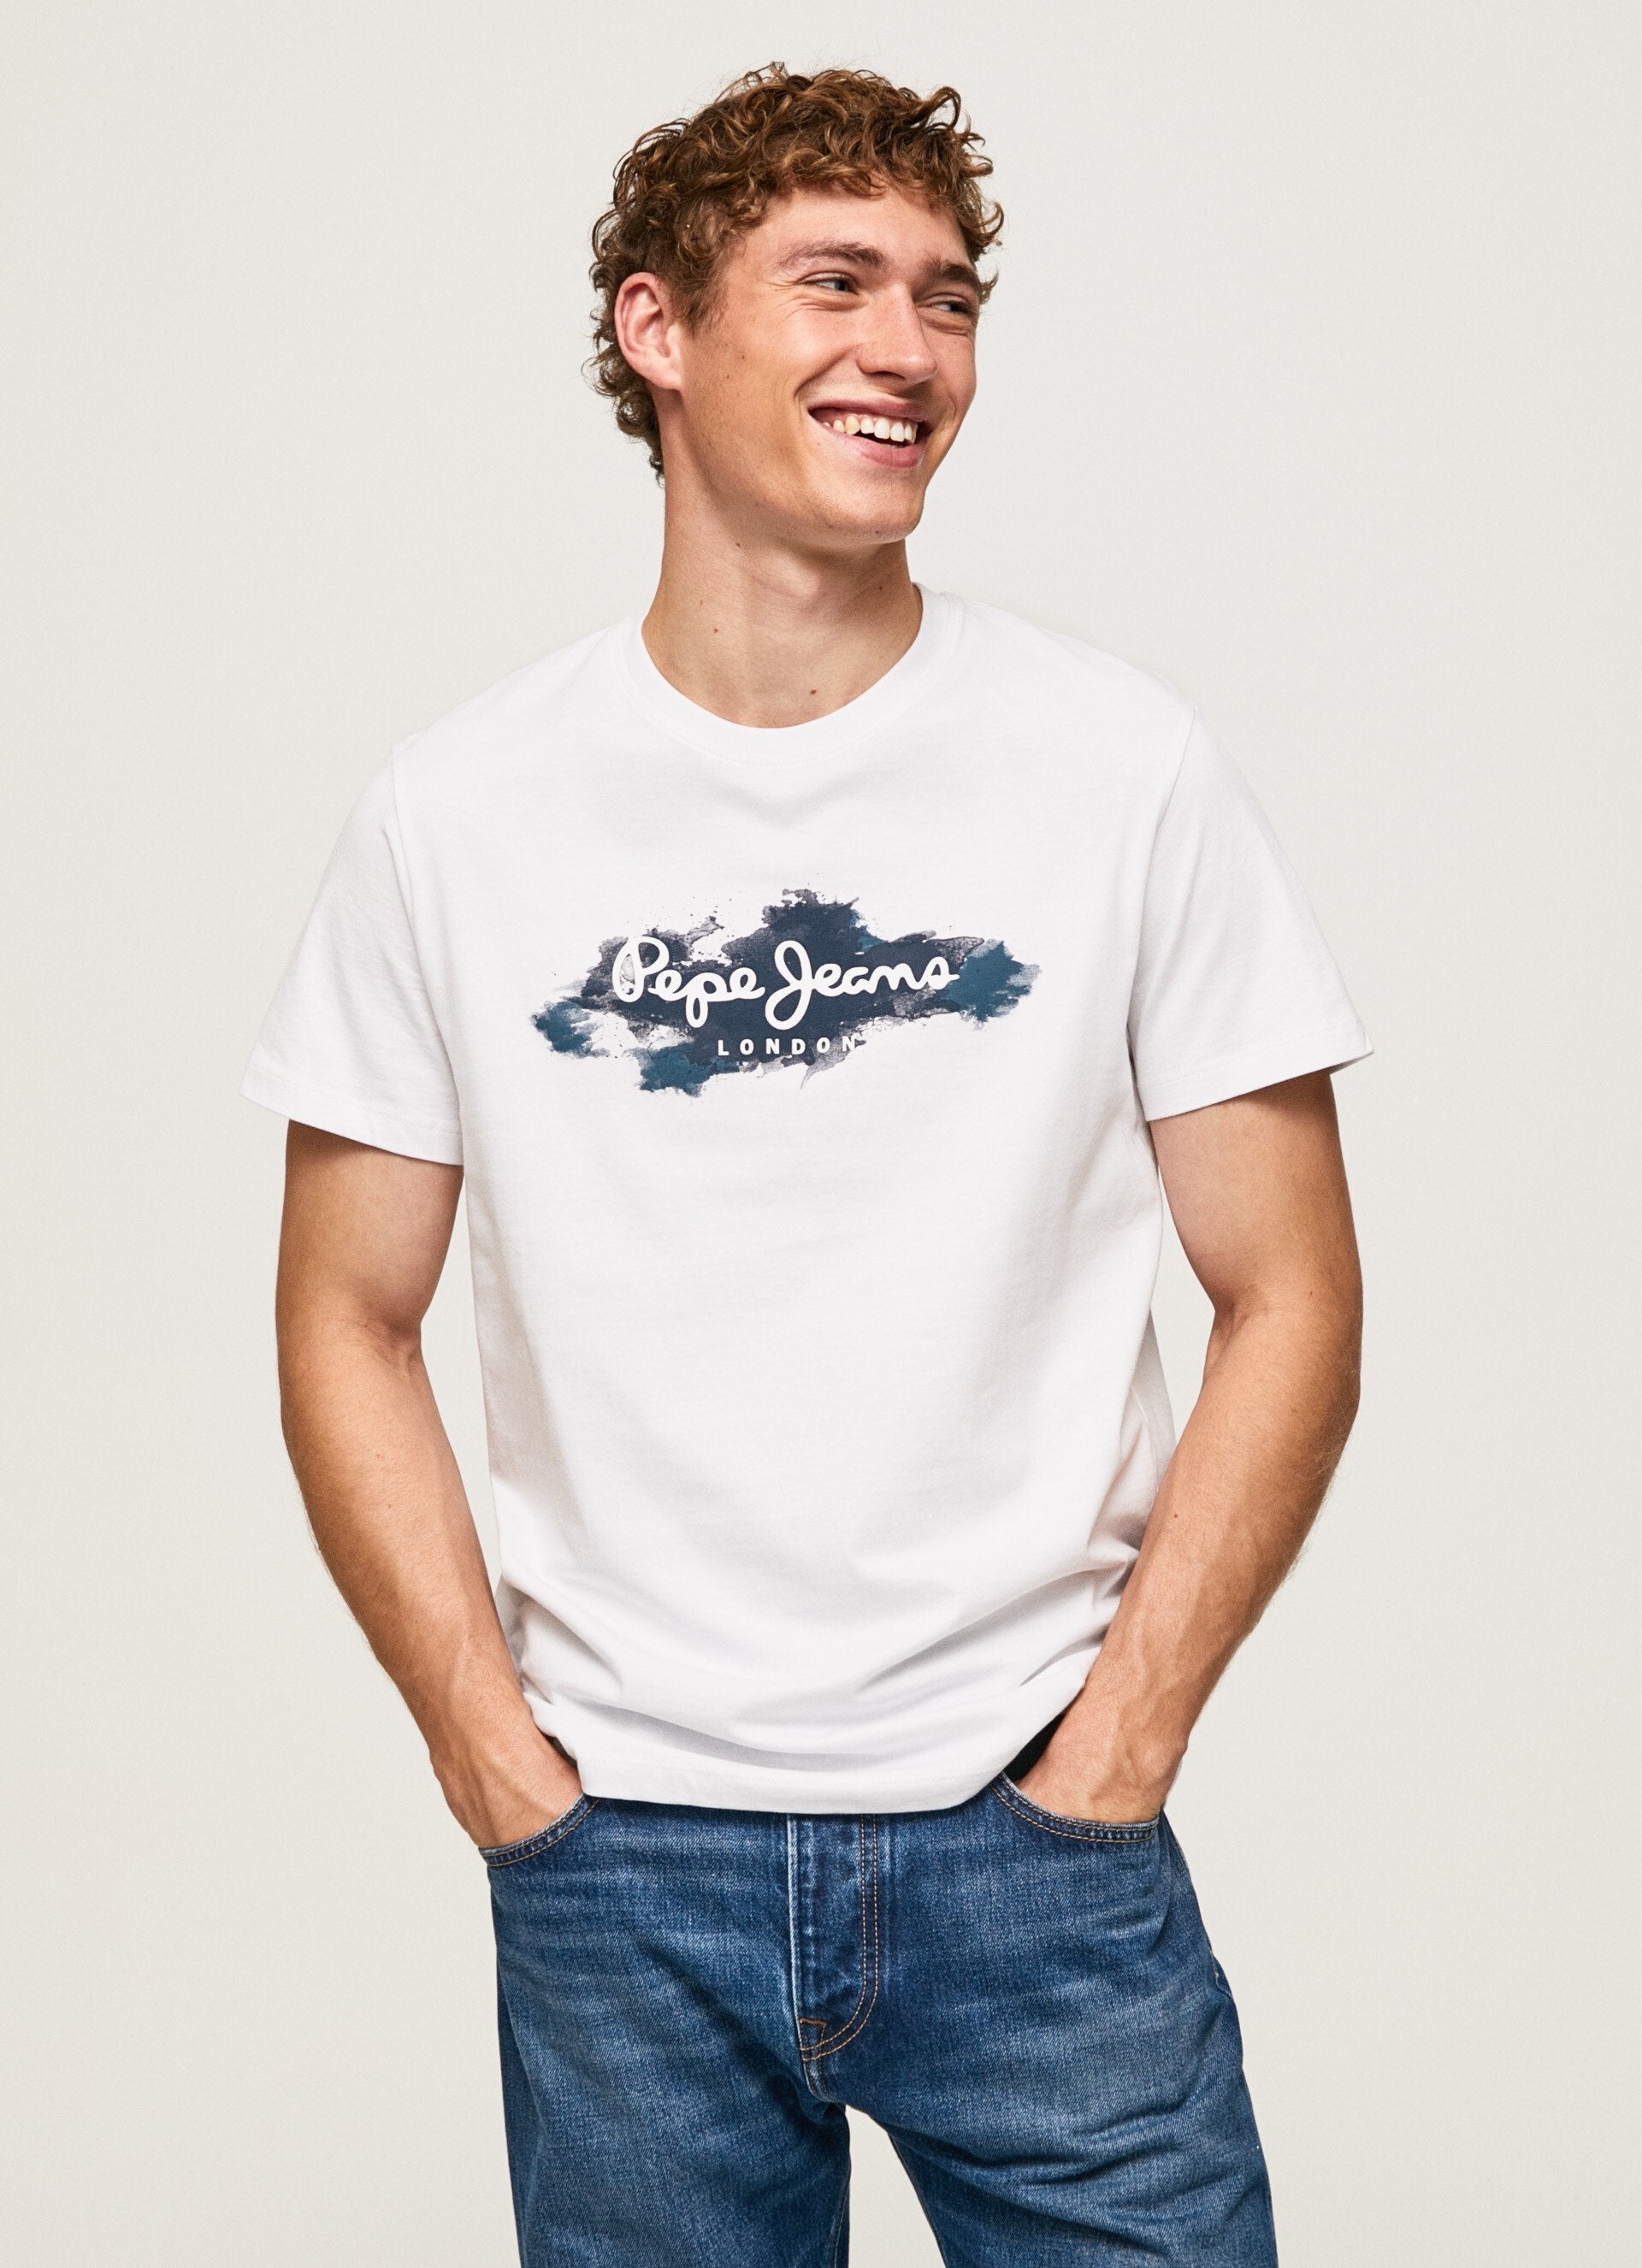 PEPE LONDON JEANS OLDWIVE | T-SHIRT WHITE FIT REGULAR